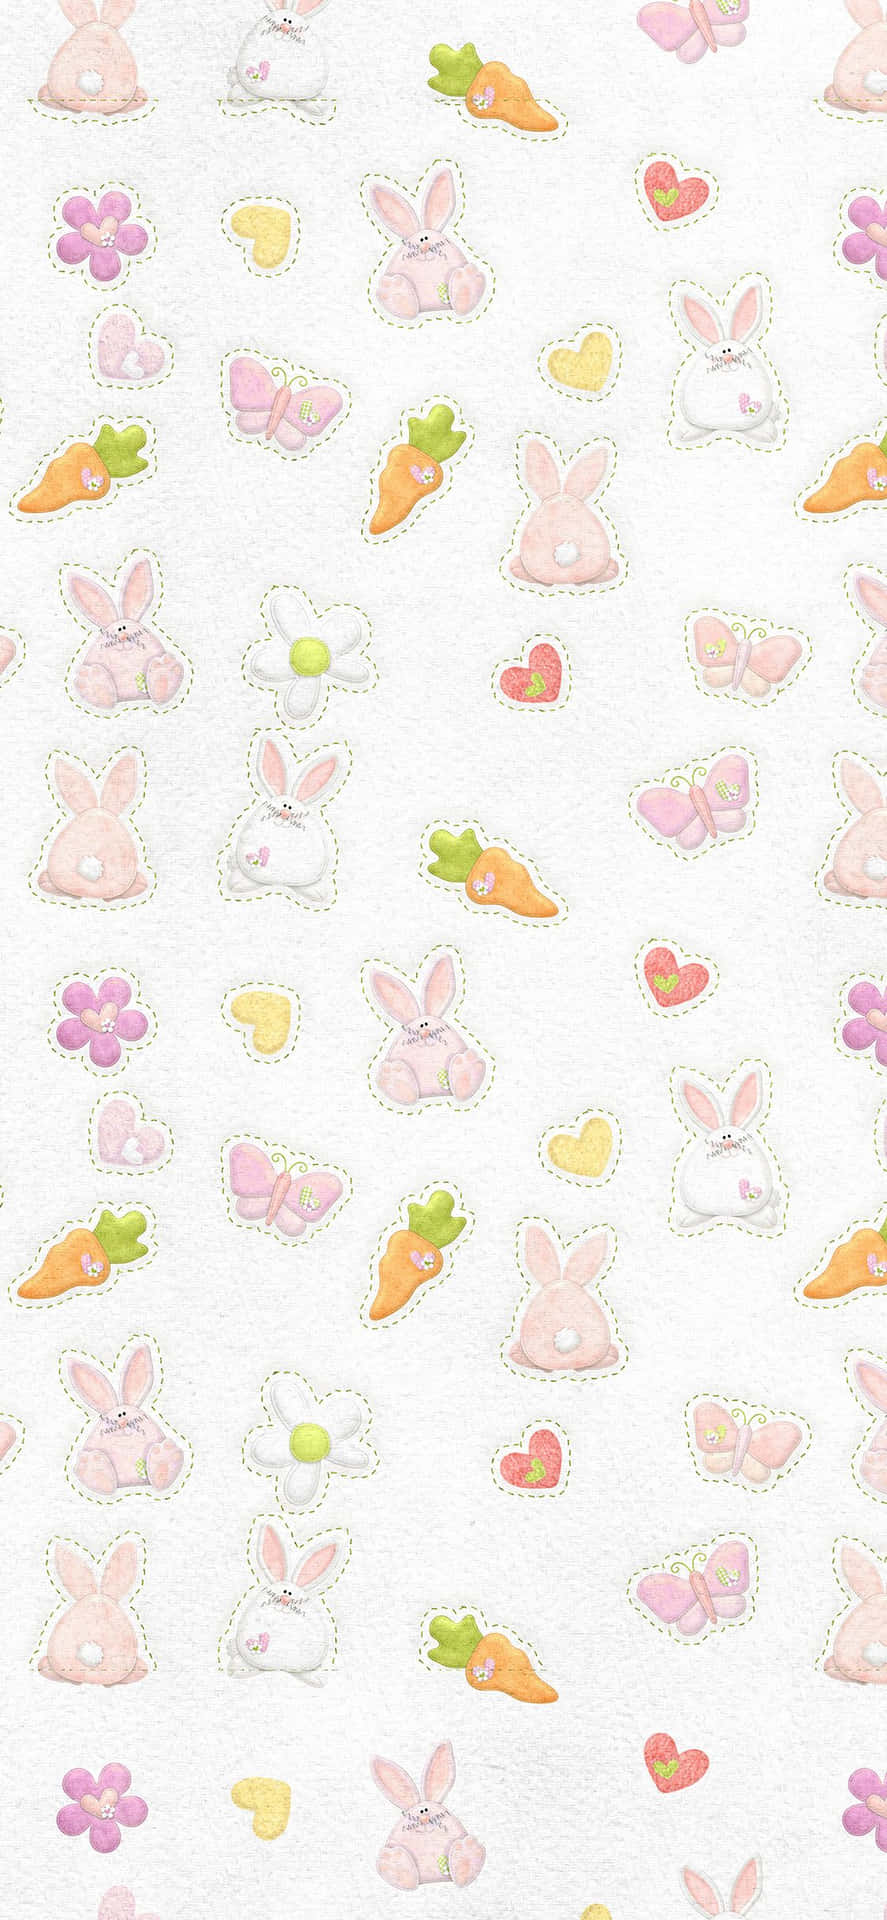 Bunny And Carrots Cute Pattern Iphone Wallpaper